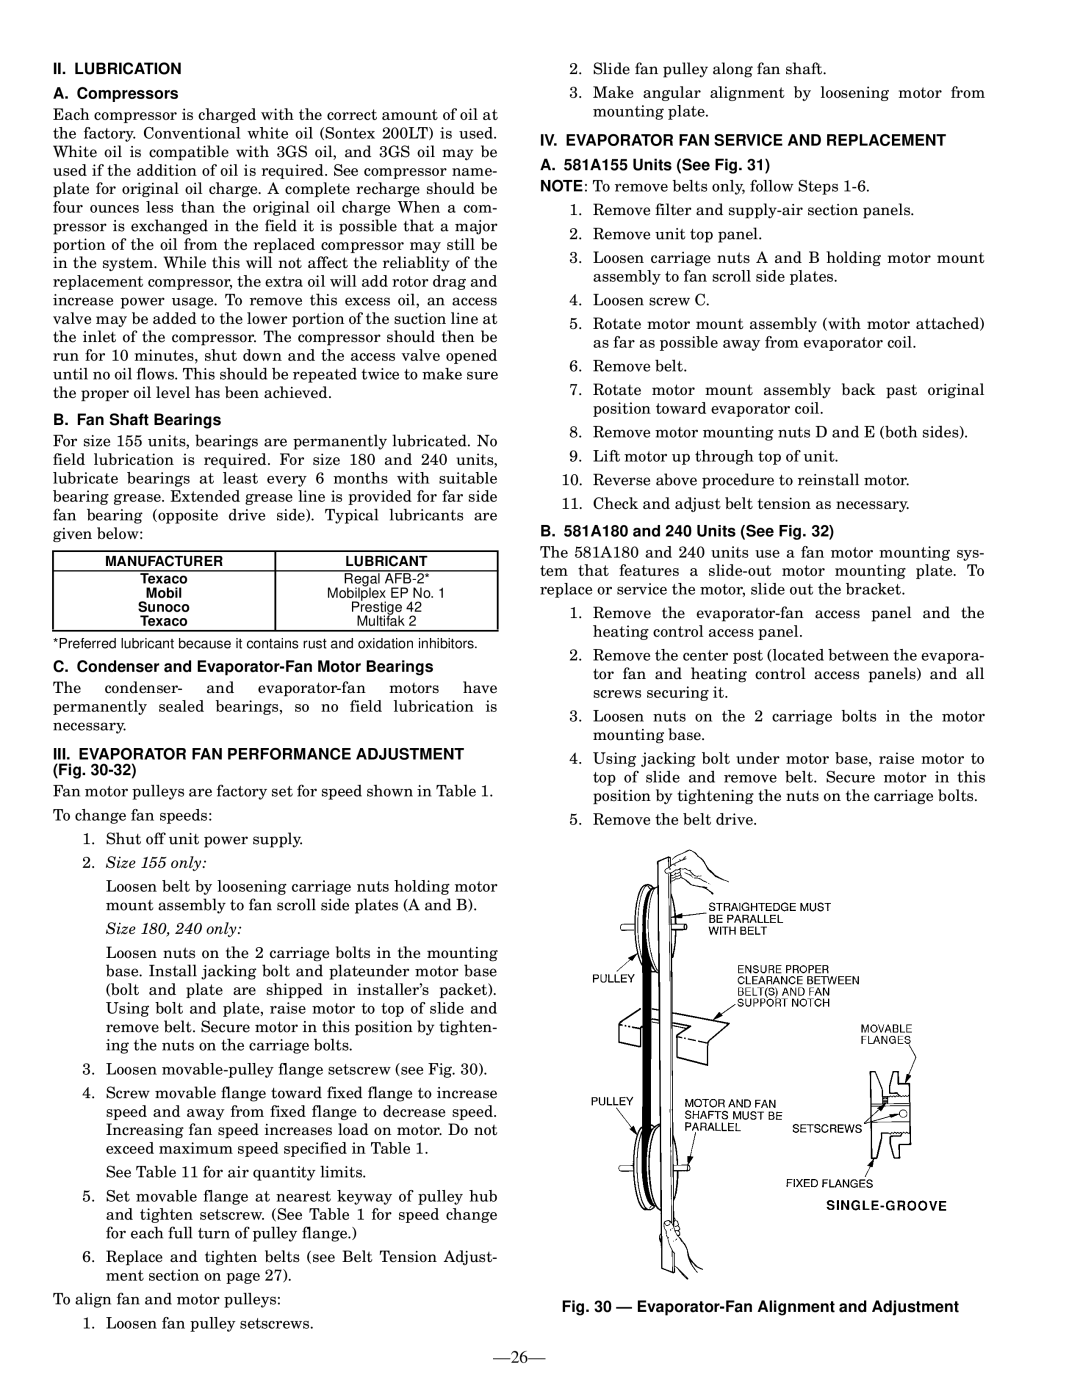 Bryant 581A II. LUBRICATION A. Compressors, B. Fan Shaft Bearings, C. Condenser and Evaporator-FanMotor Bearings 